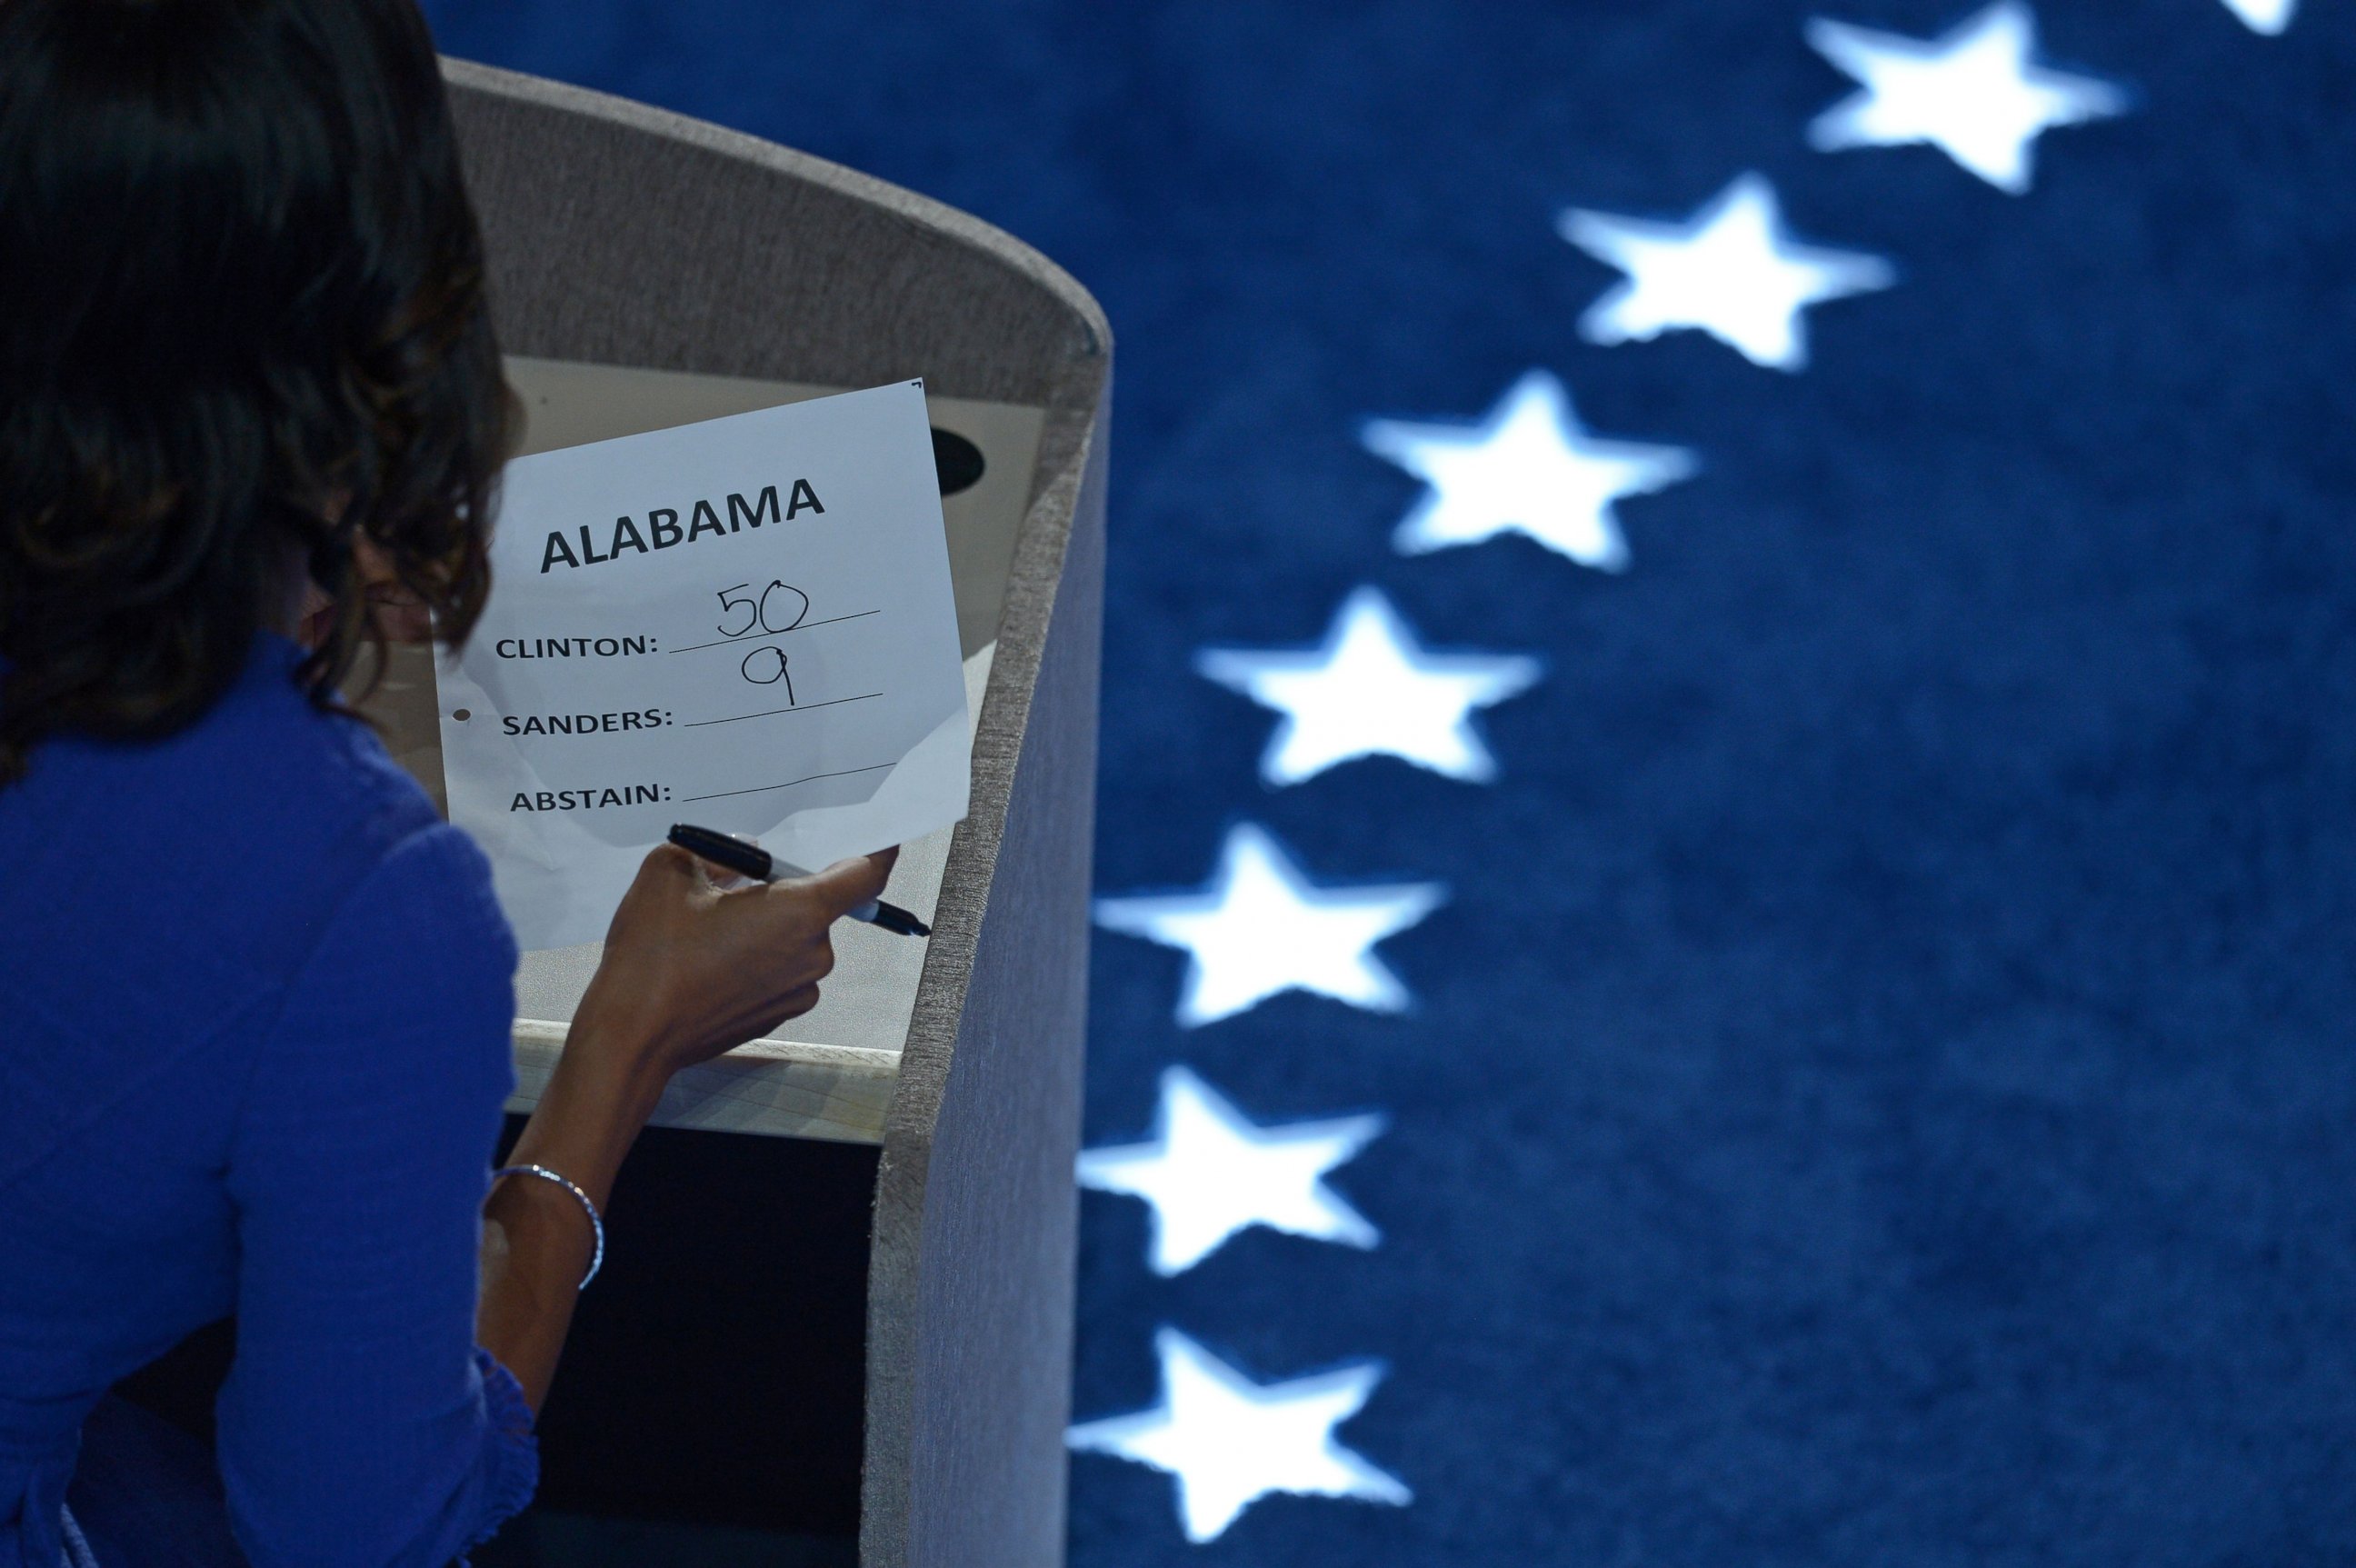 PHOTO: A staffer tallies the vote of the Alabama delegation during the roll call on Day 2 of the Democratic National Convention in Philadelphia, July 26, 2016. 